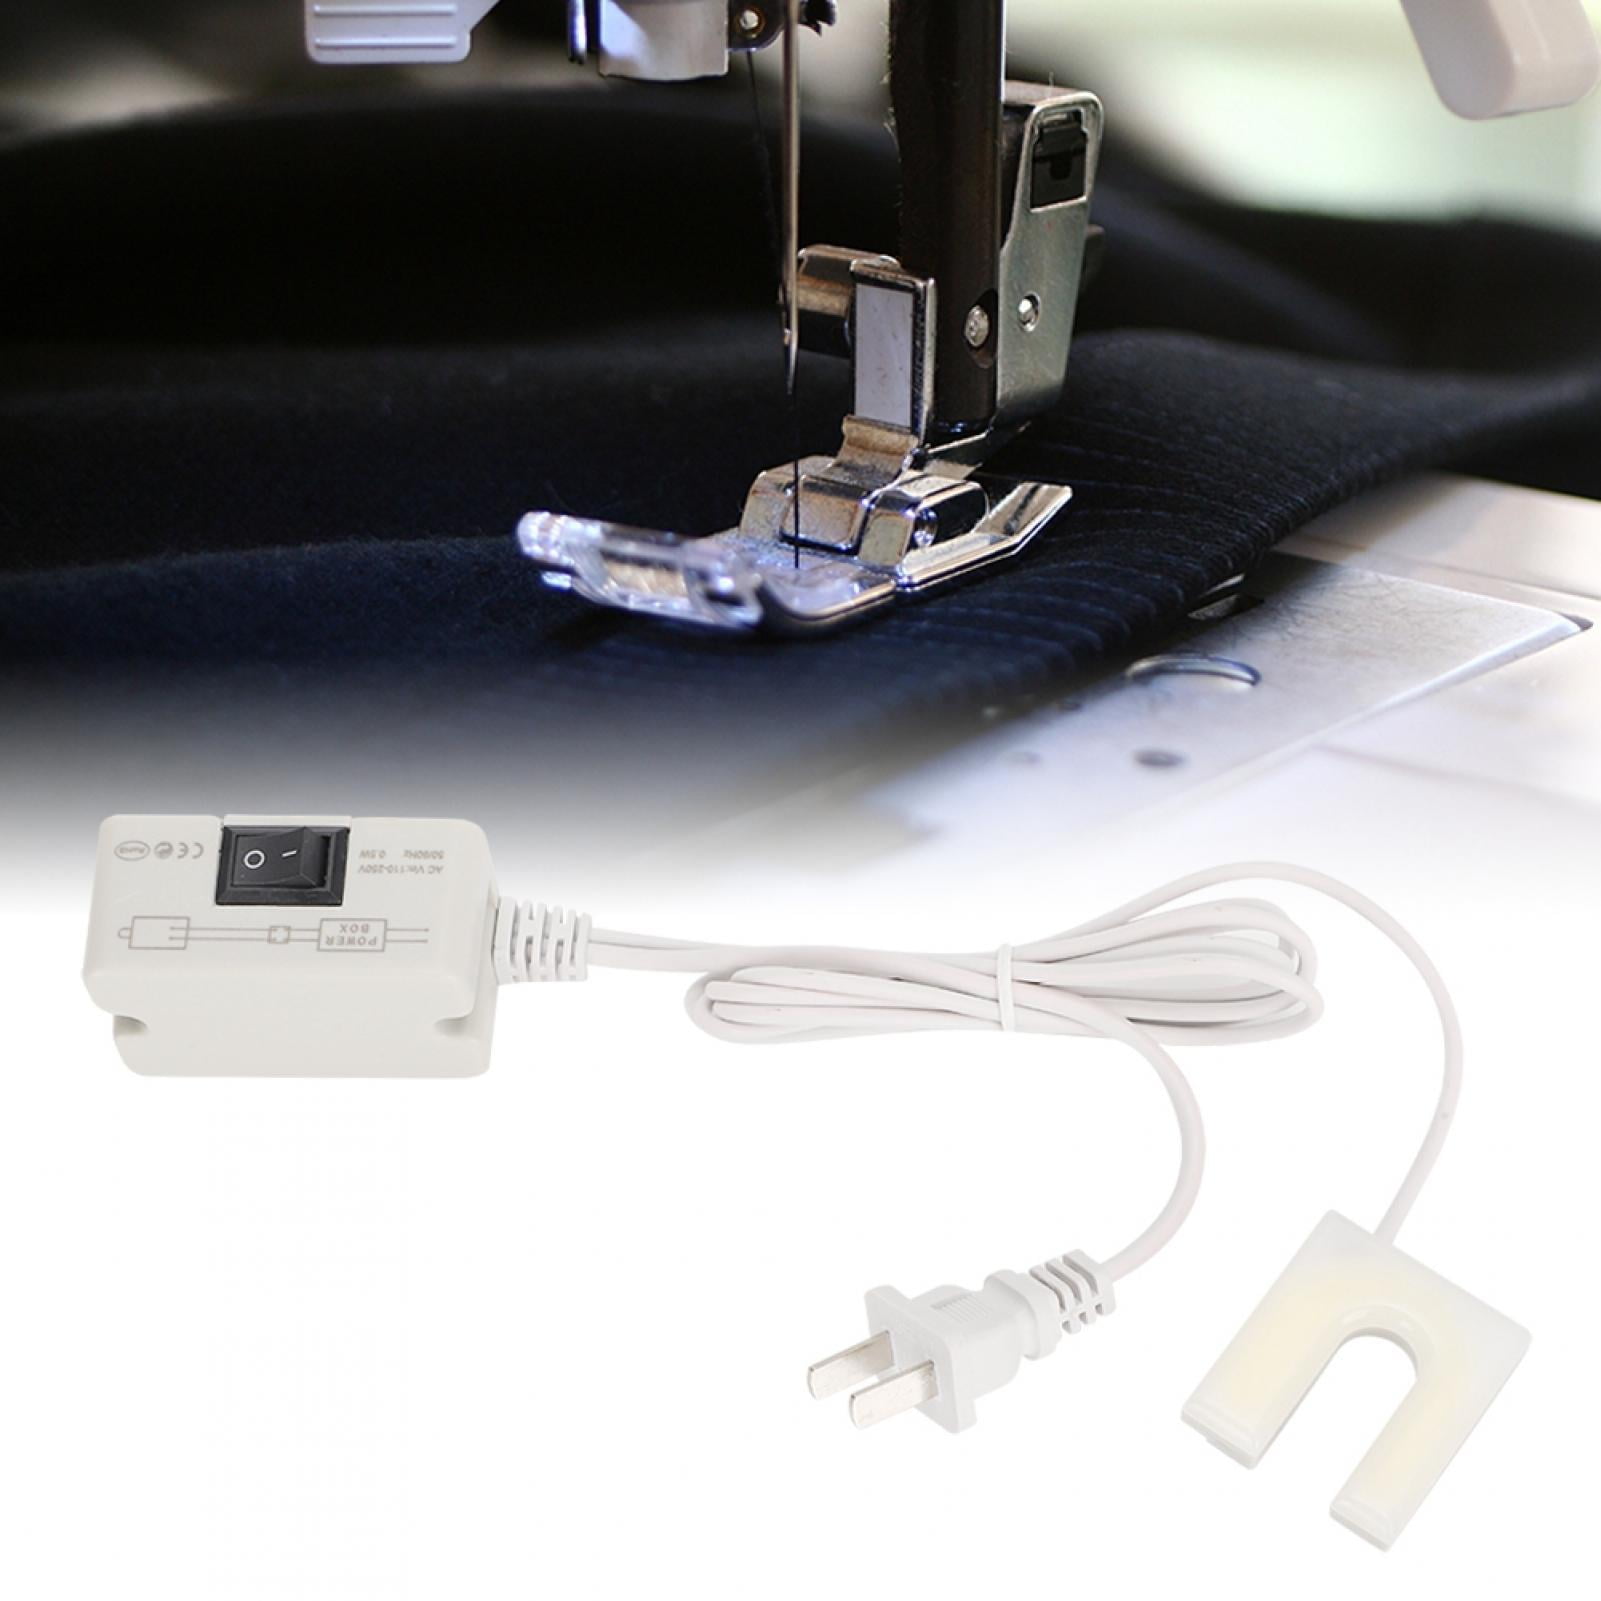 The Sewing light - perfect illumination of your sewing table